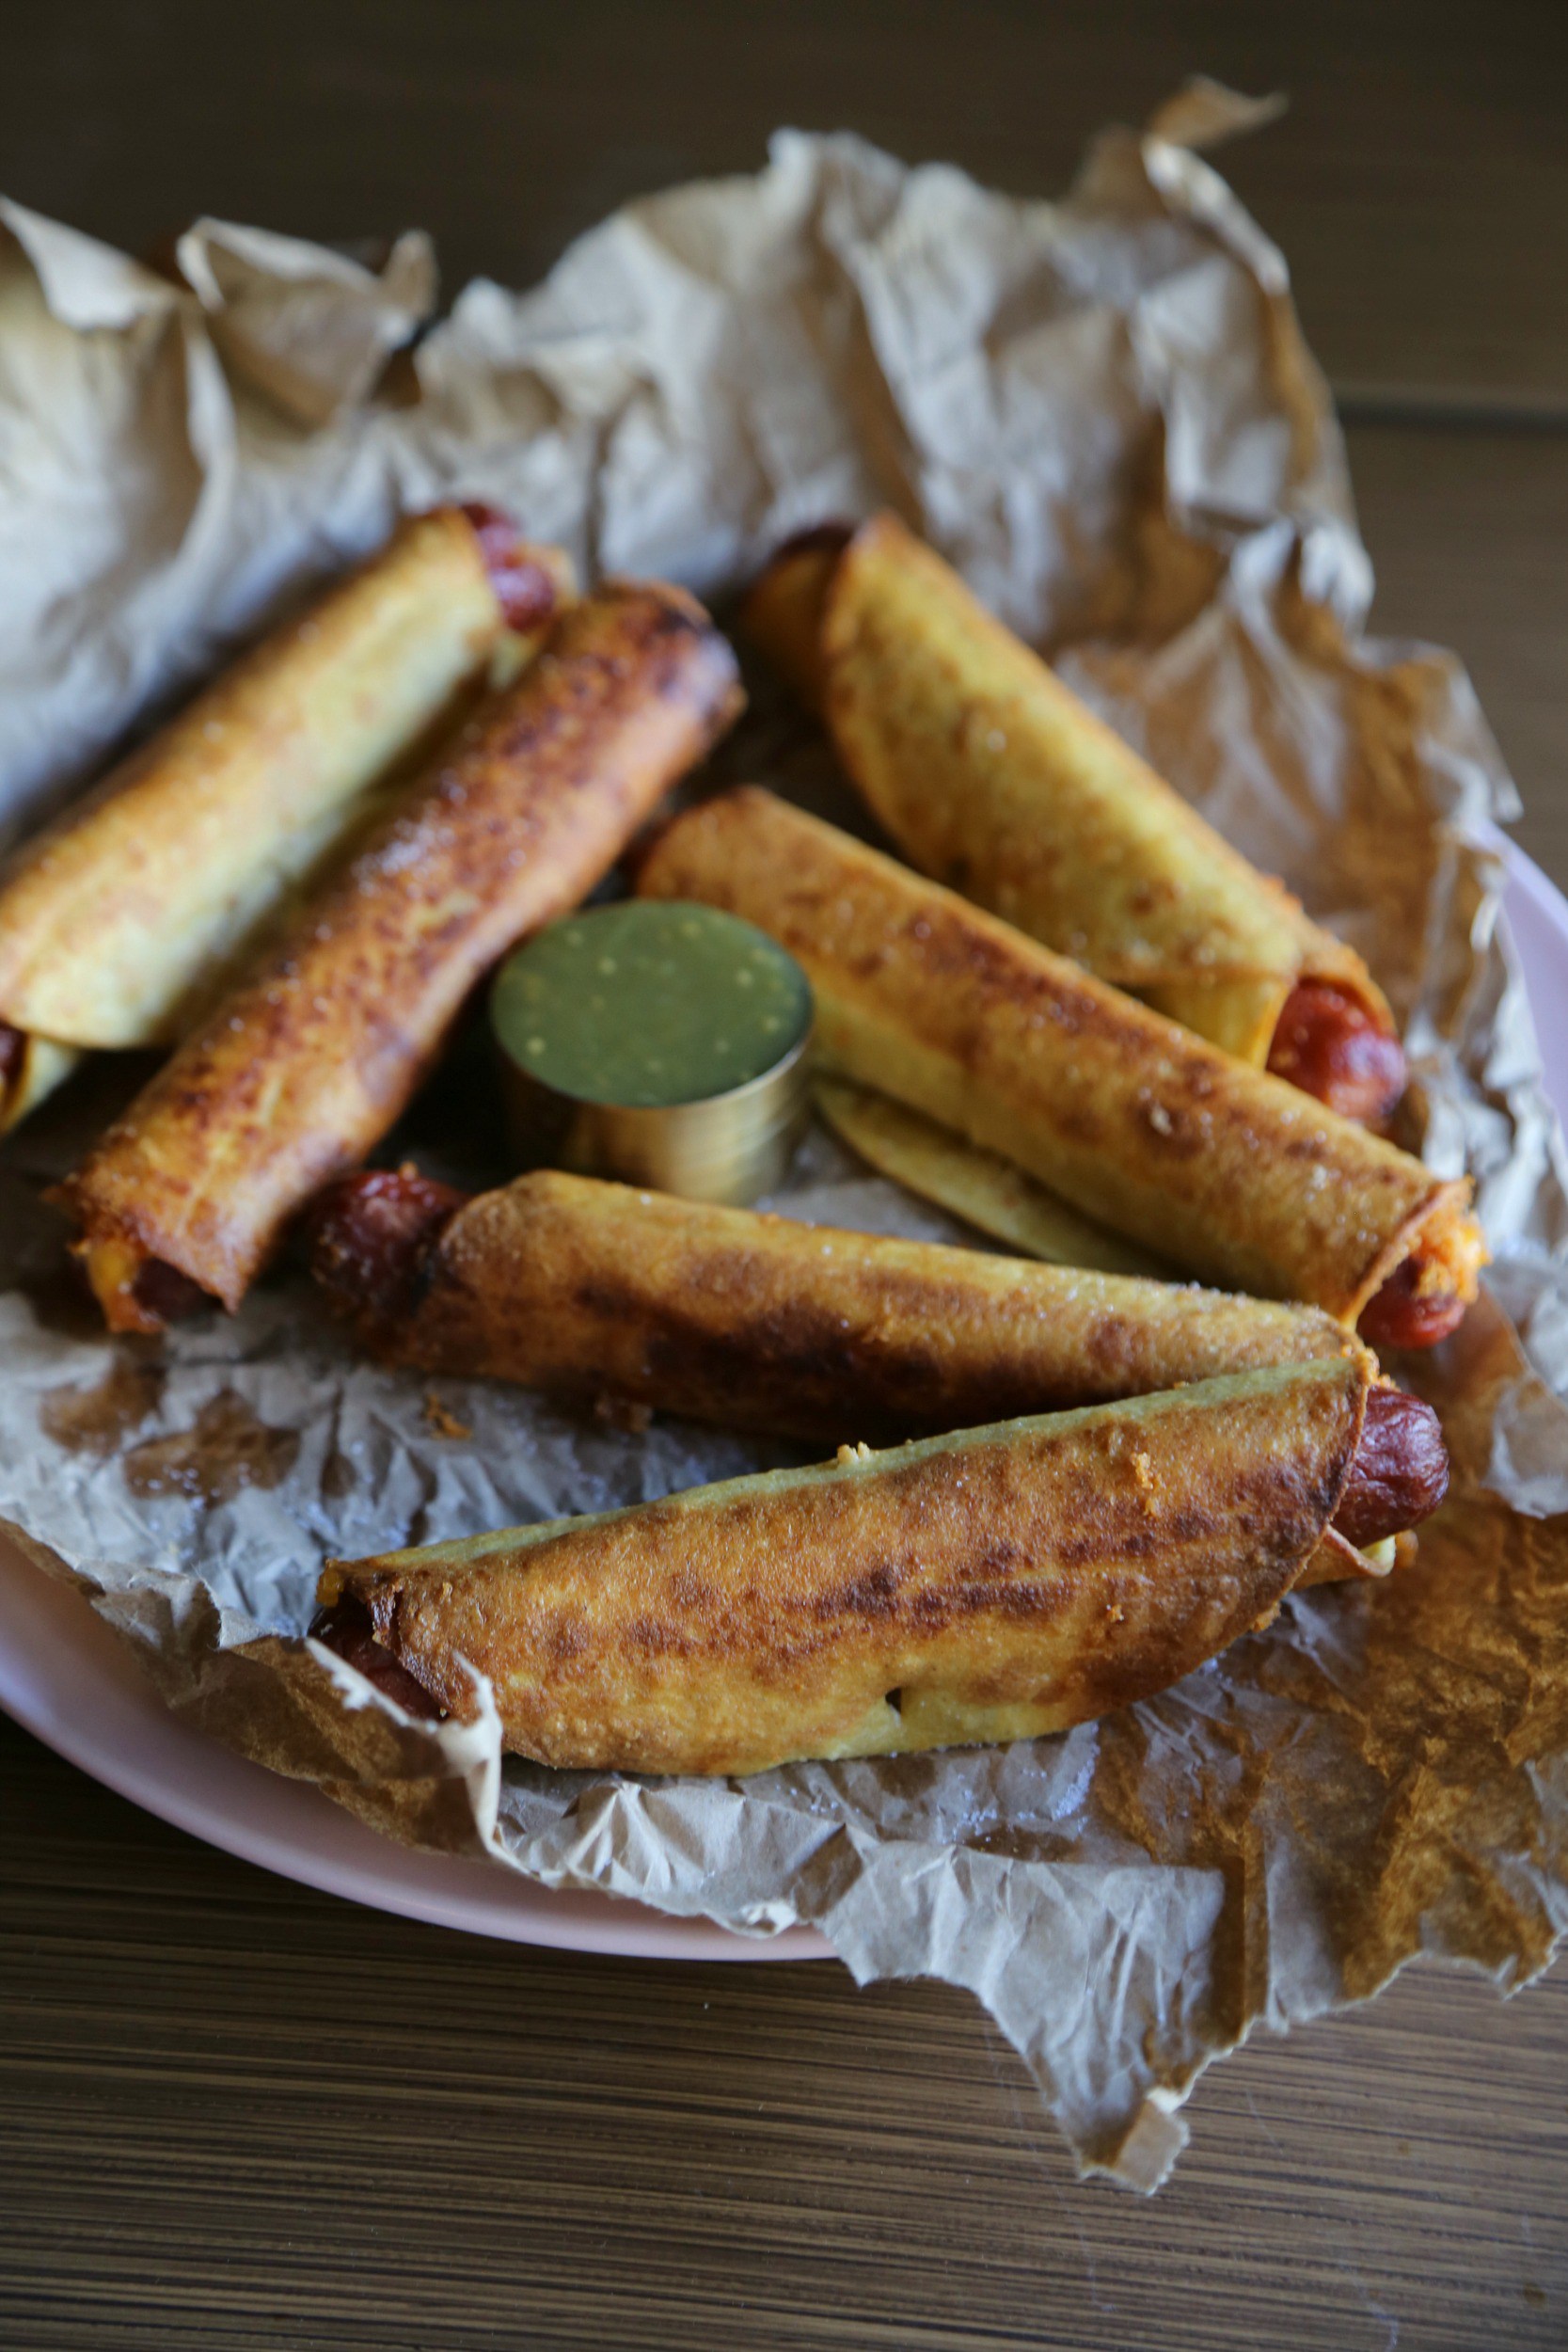 Cool Mom Eats weekly meal plan: Crispy Dog recipe by Vianney Rodriguez at Sweet Life Bake